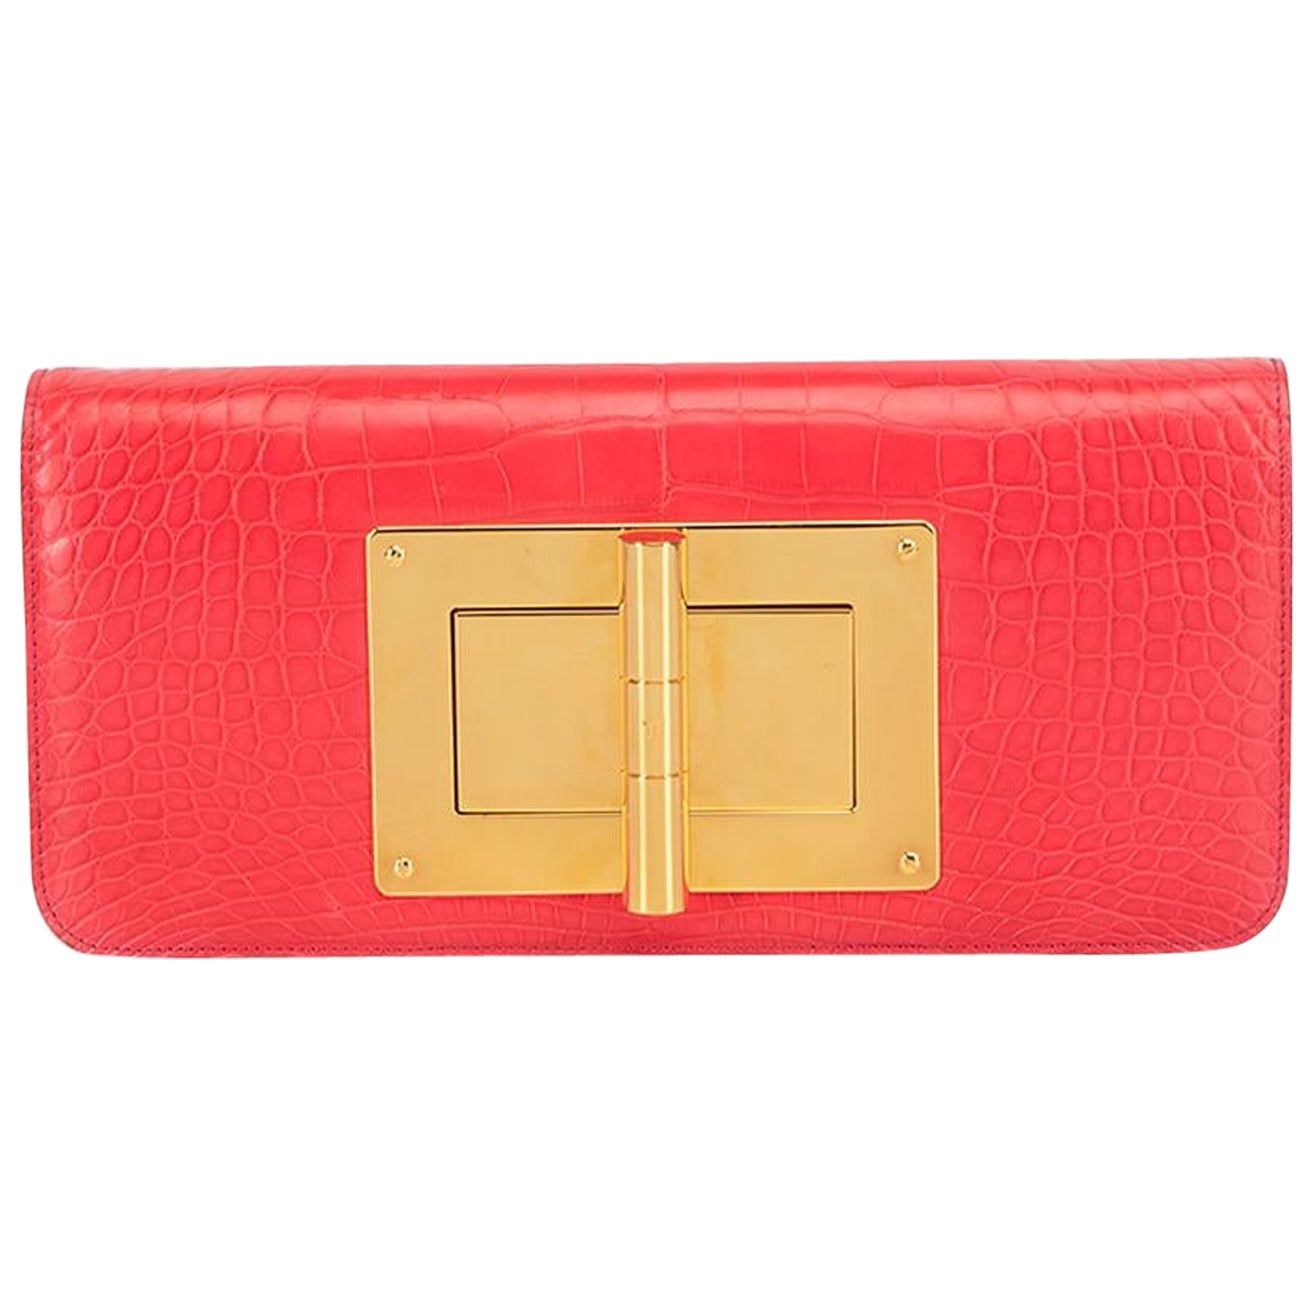 Tom Ford Women's Embossed Leather Natalia East West Turnlock Convertible Clutch For Sale